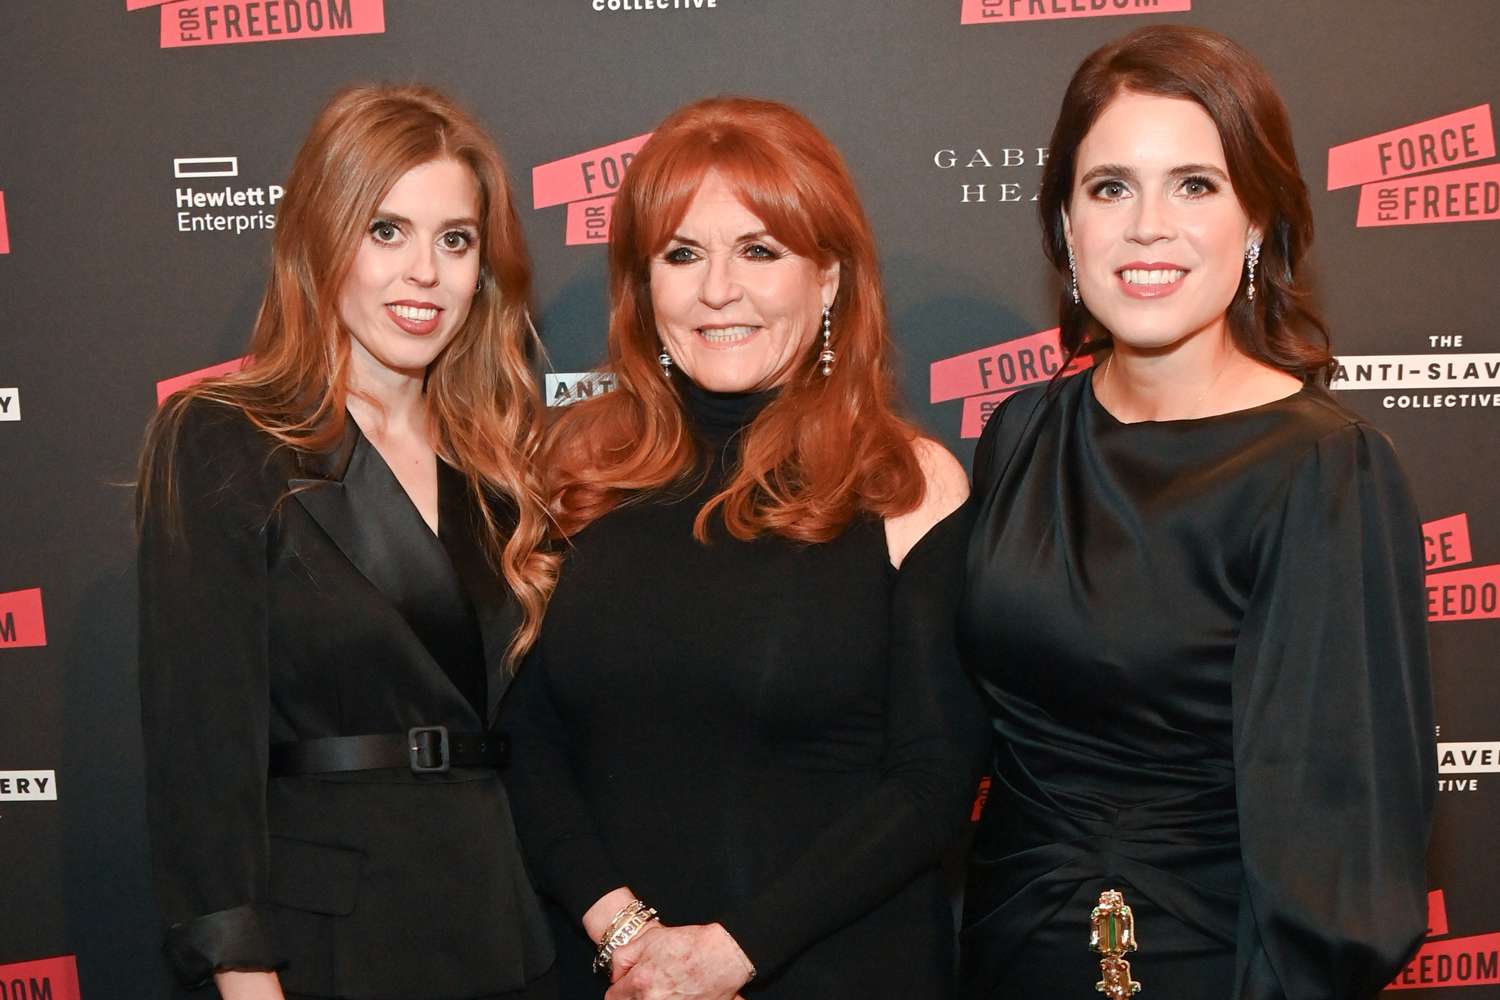 Sarah Ferguson Says Princess Beatrice and Princess Eugenie Know She'll 'Tell It to Them Straight' About Cancer